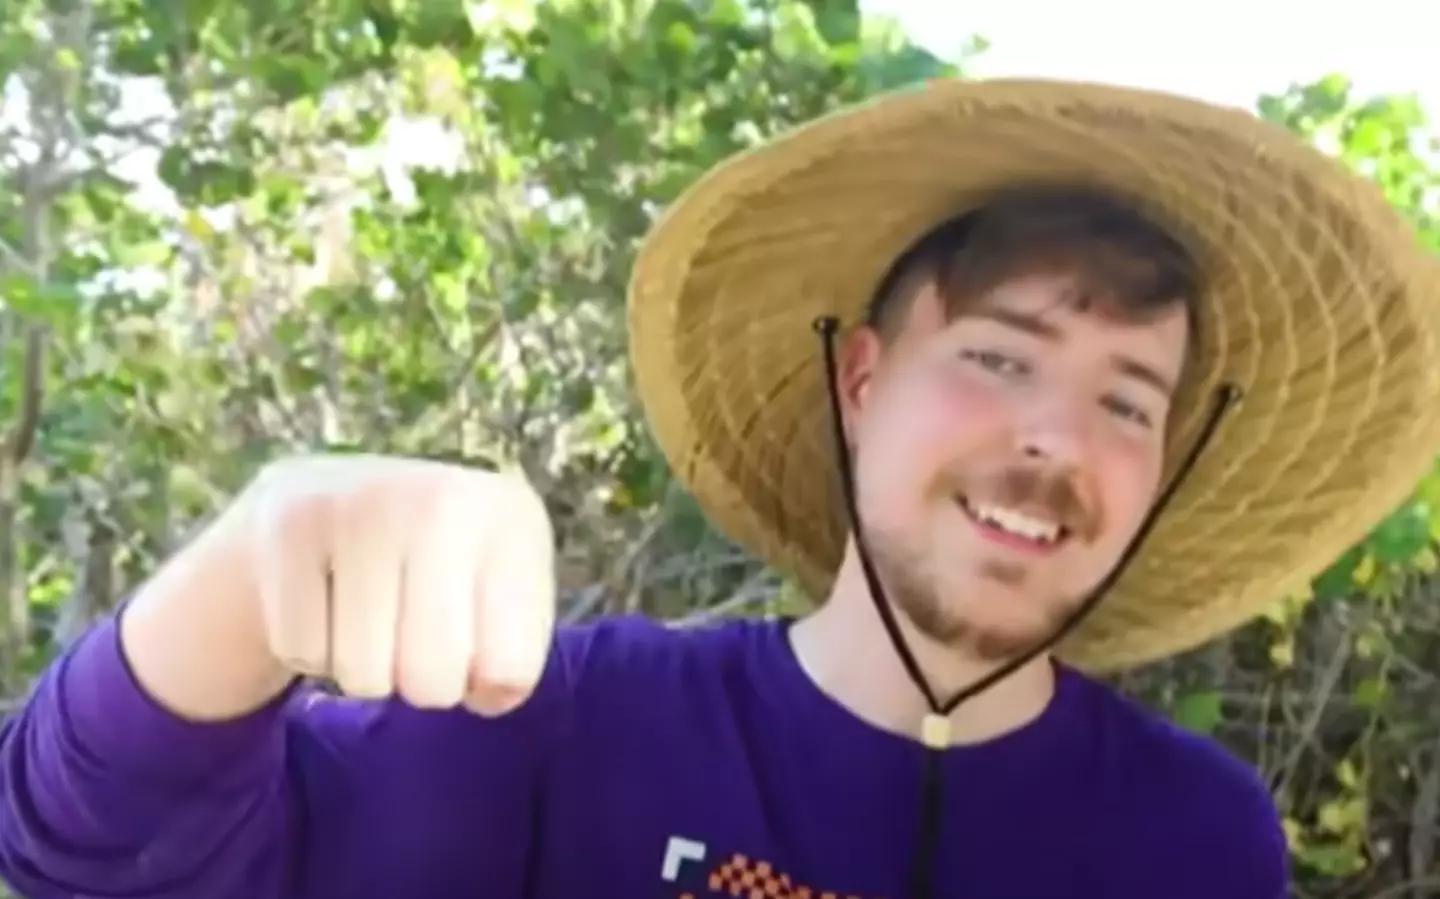 YouTuber MrBeast explains how he wants to 'push the boundaries' and 'go bigger'.